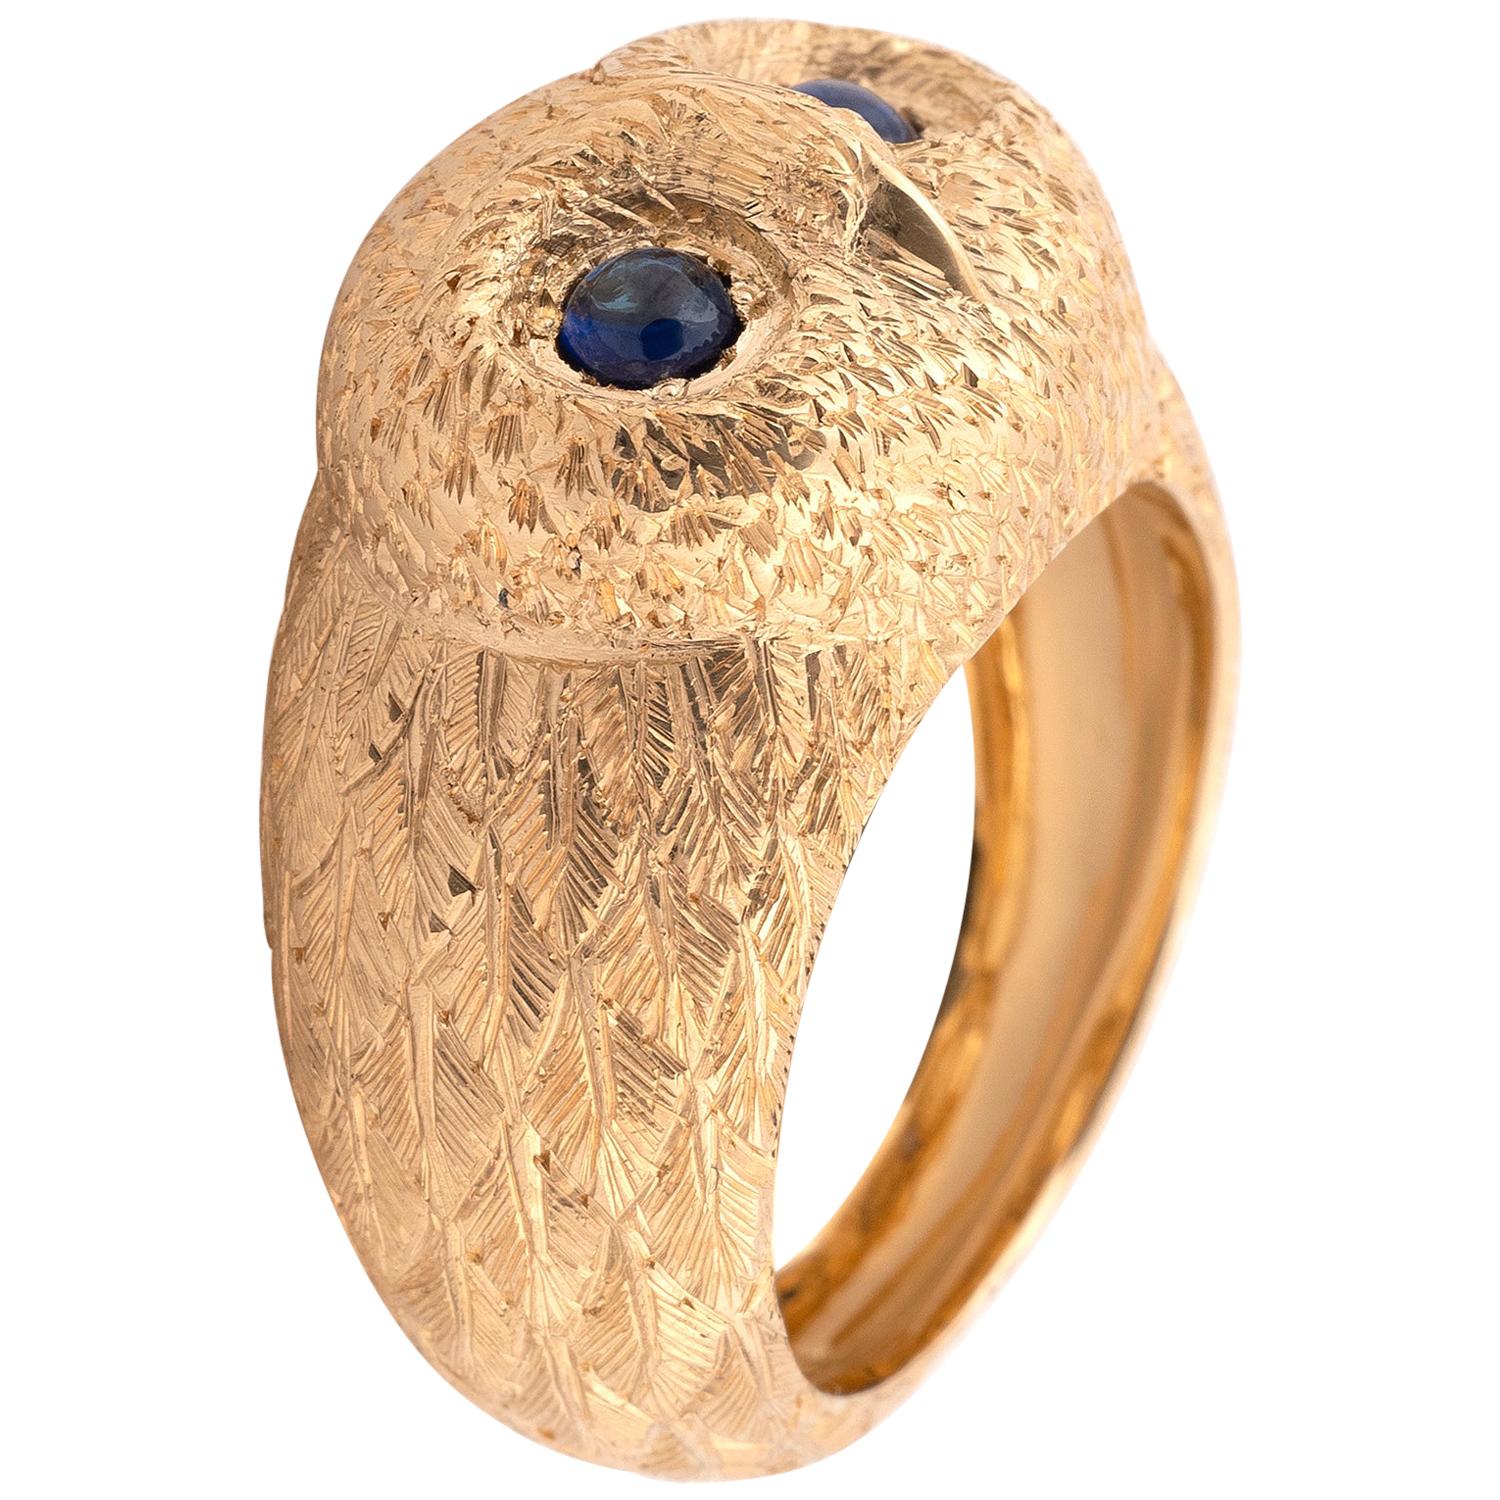 Gold and Sapphire Owl Ring